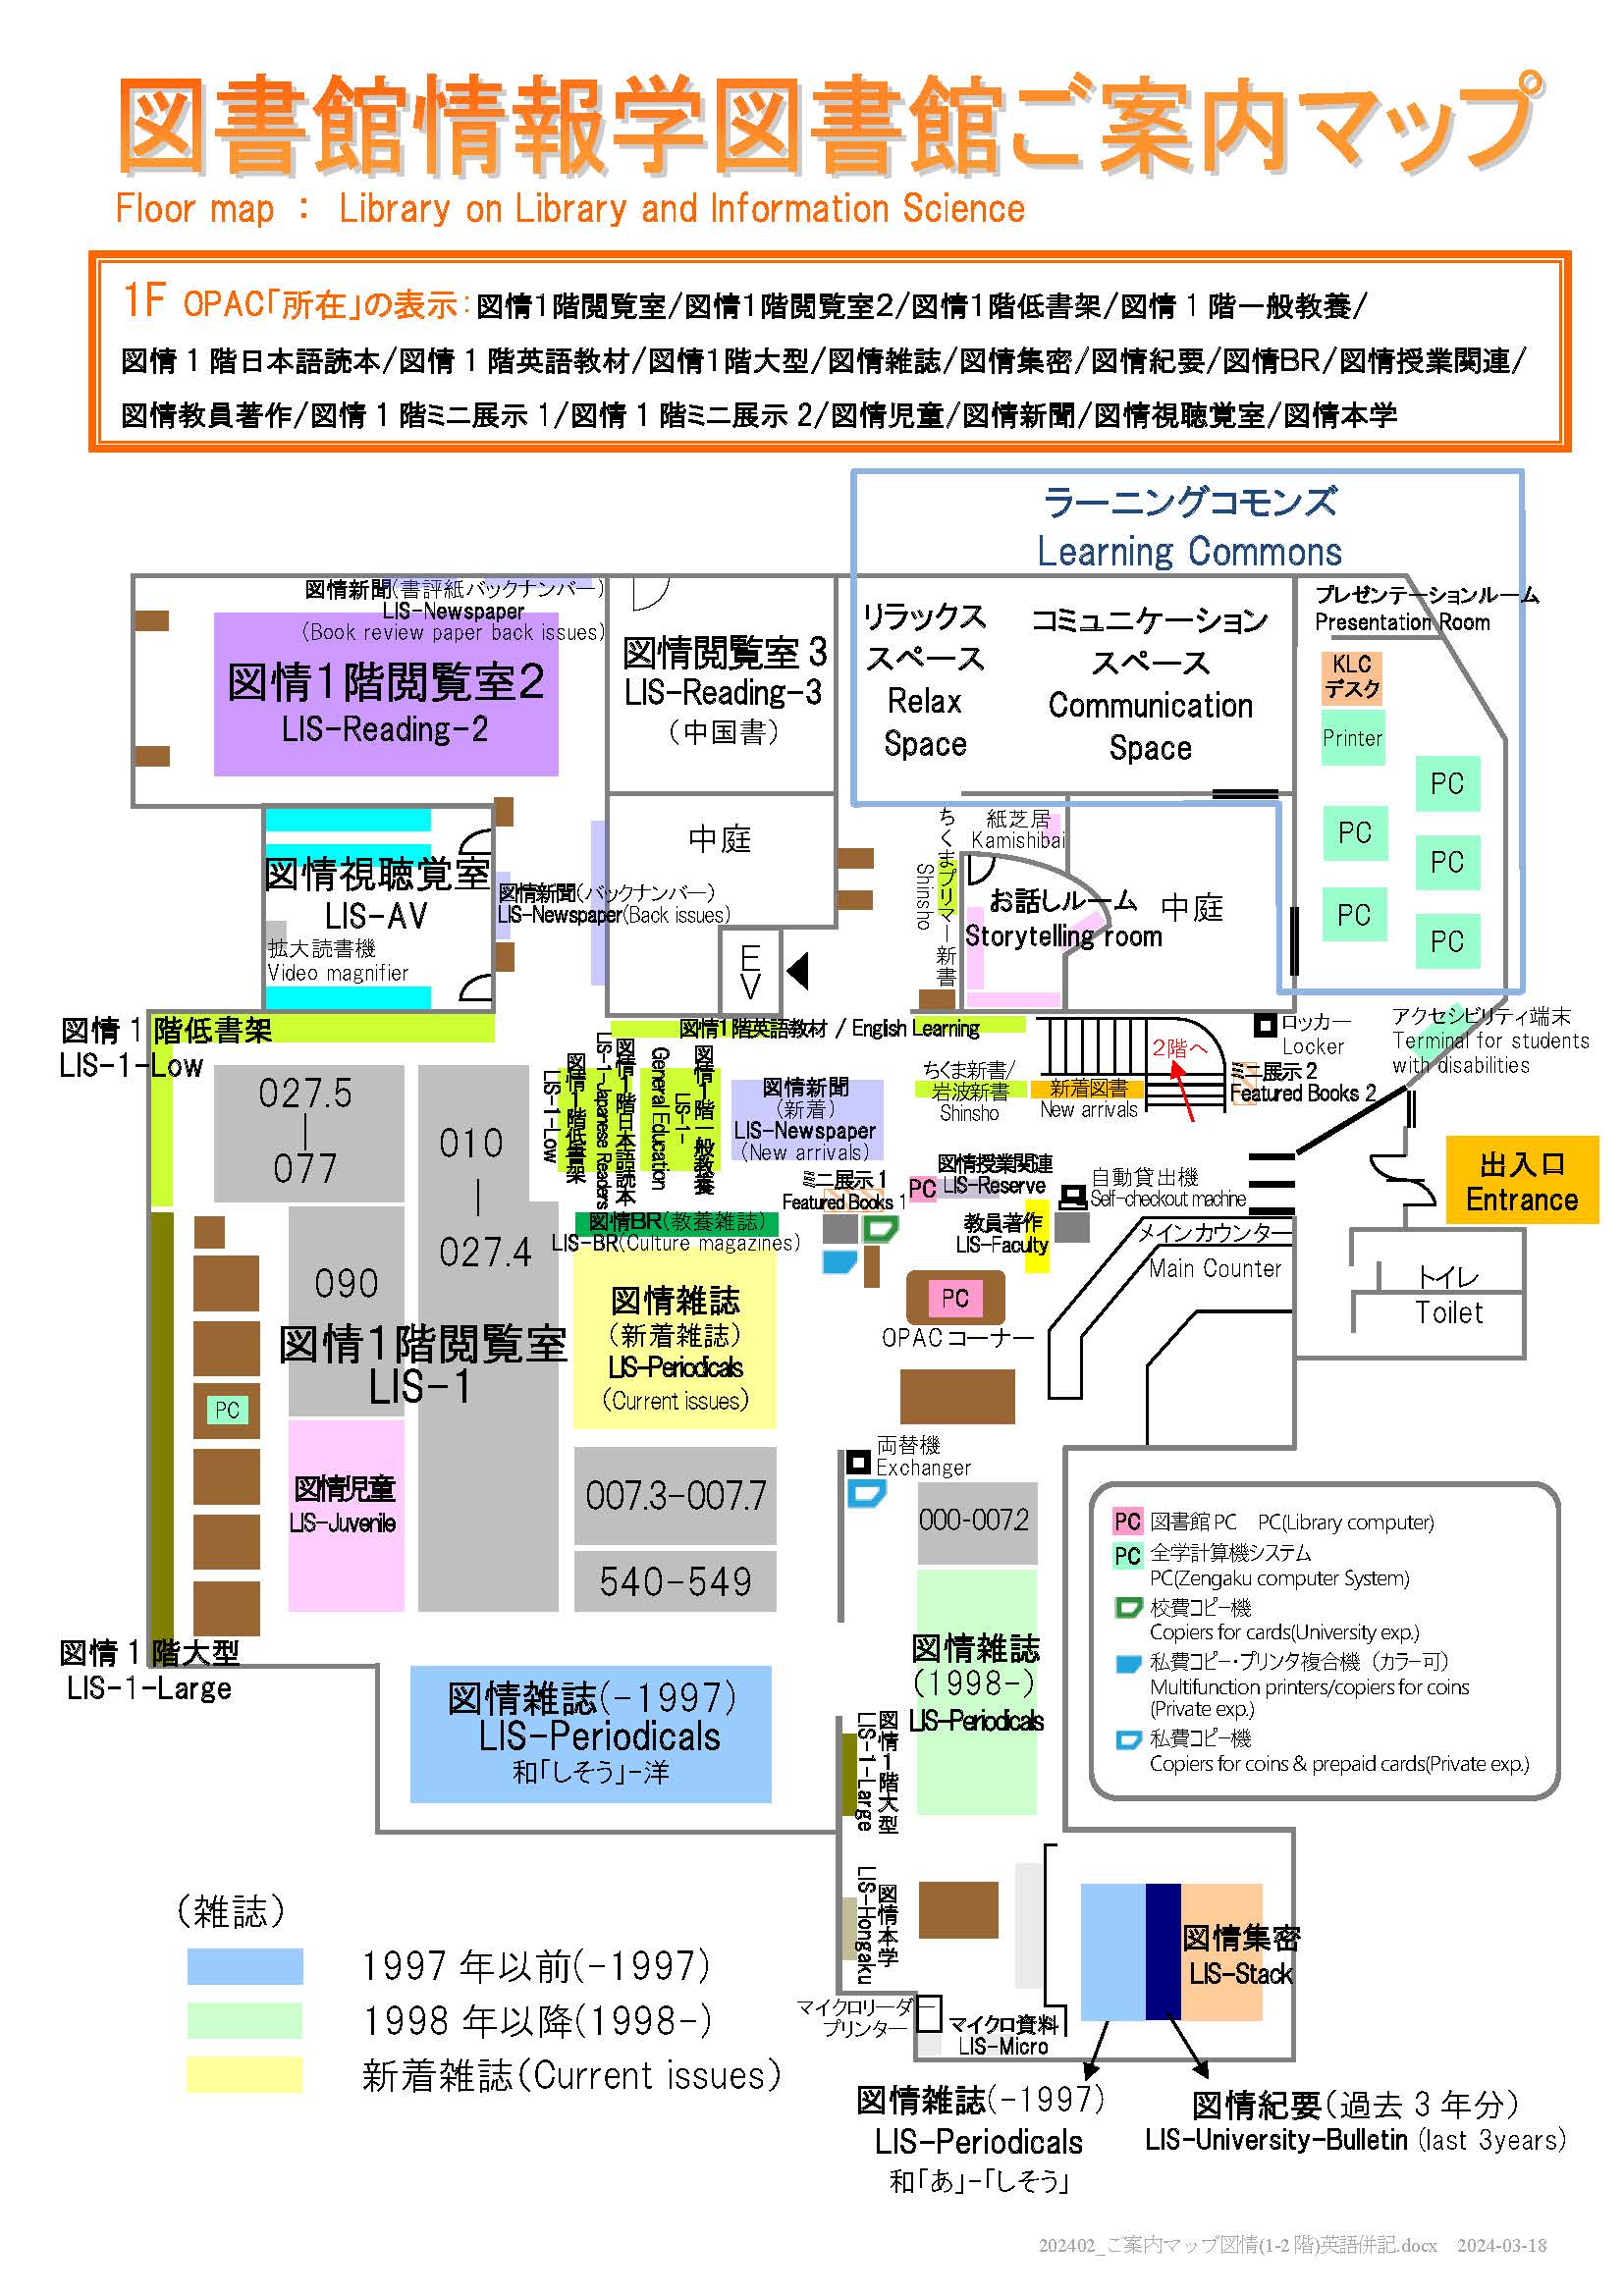 Floor map of the Library on Library and Information Science (1F)